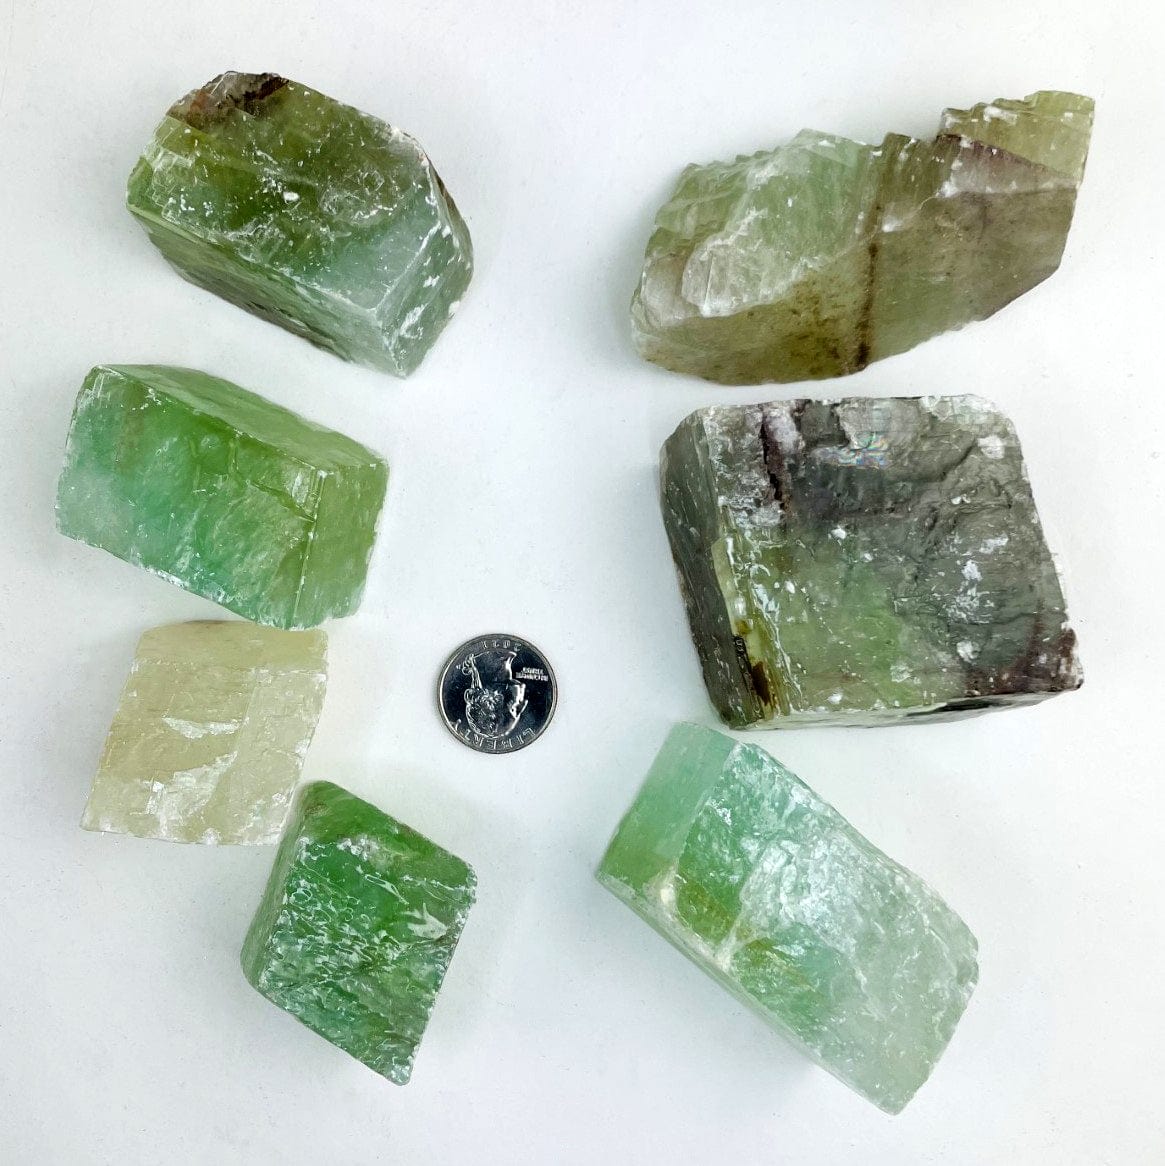 Green Calcite Stones with a quarter for size